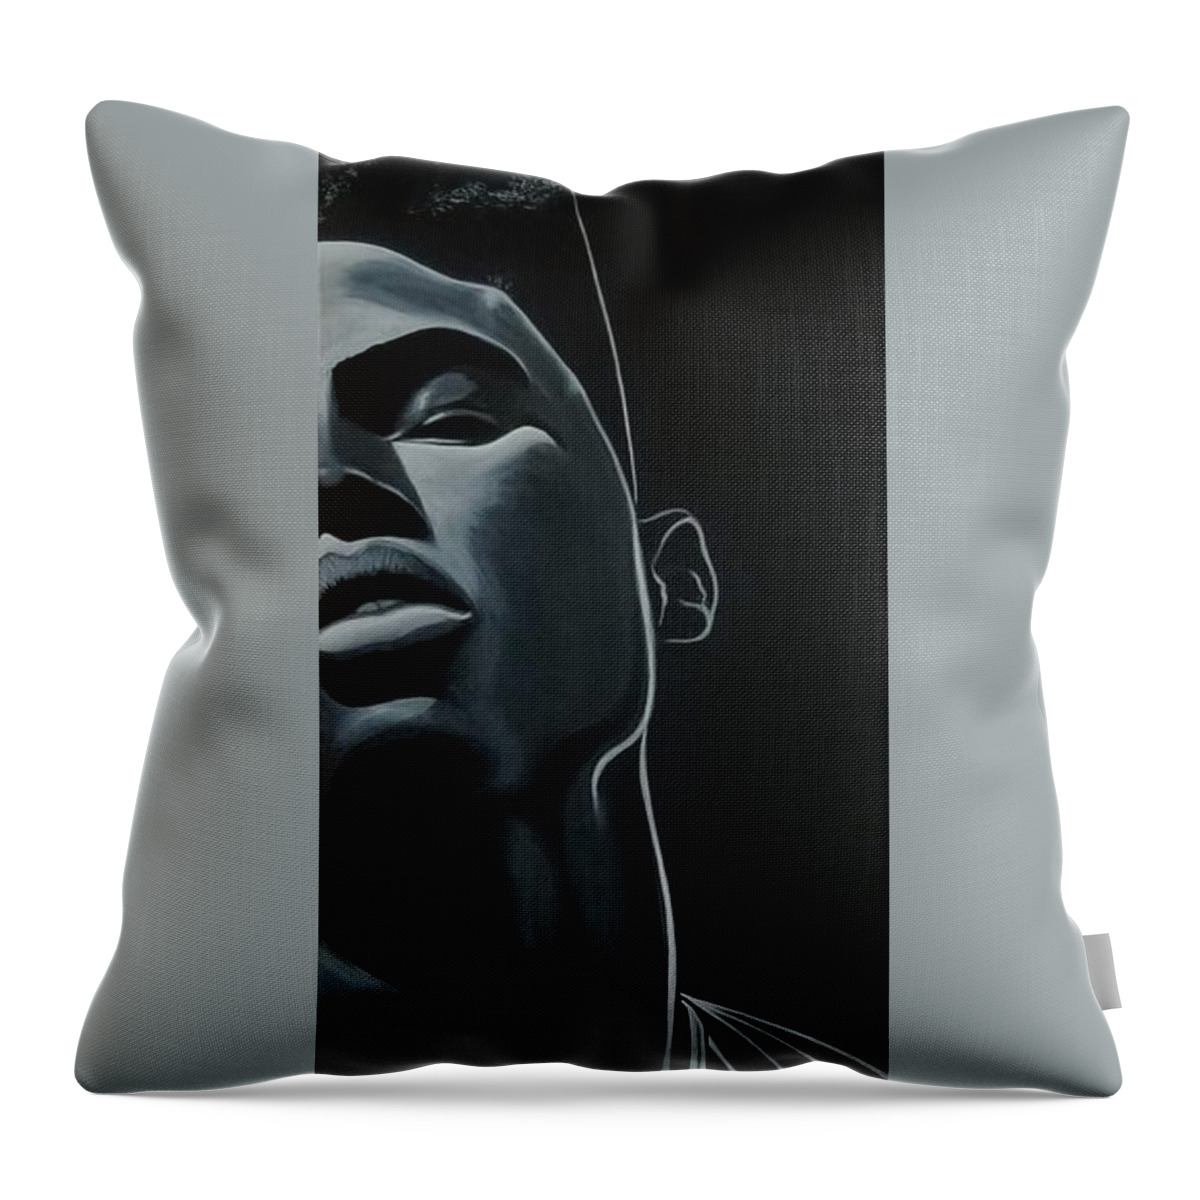  Throw Pillow featuring the painting Presence by Bryon Stewart